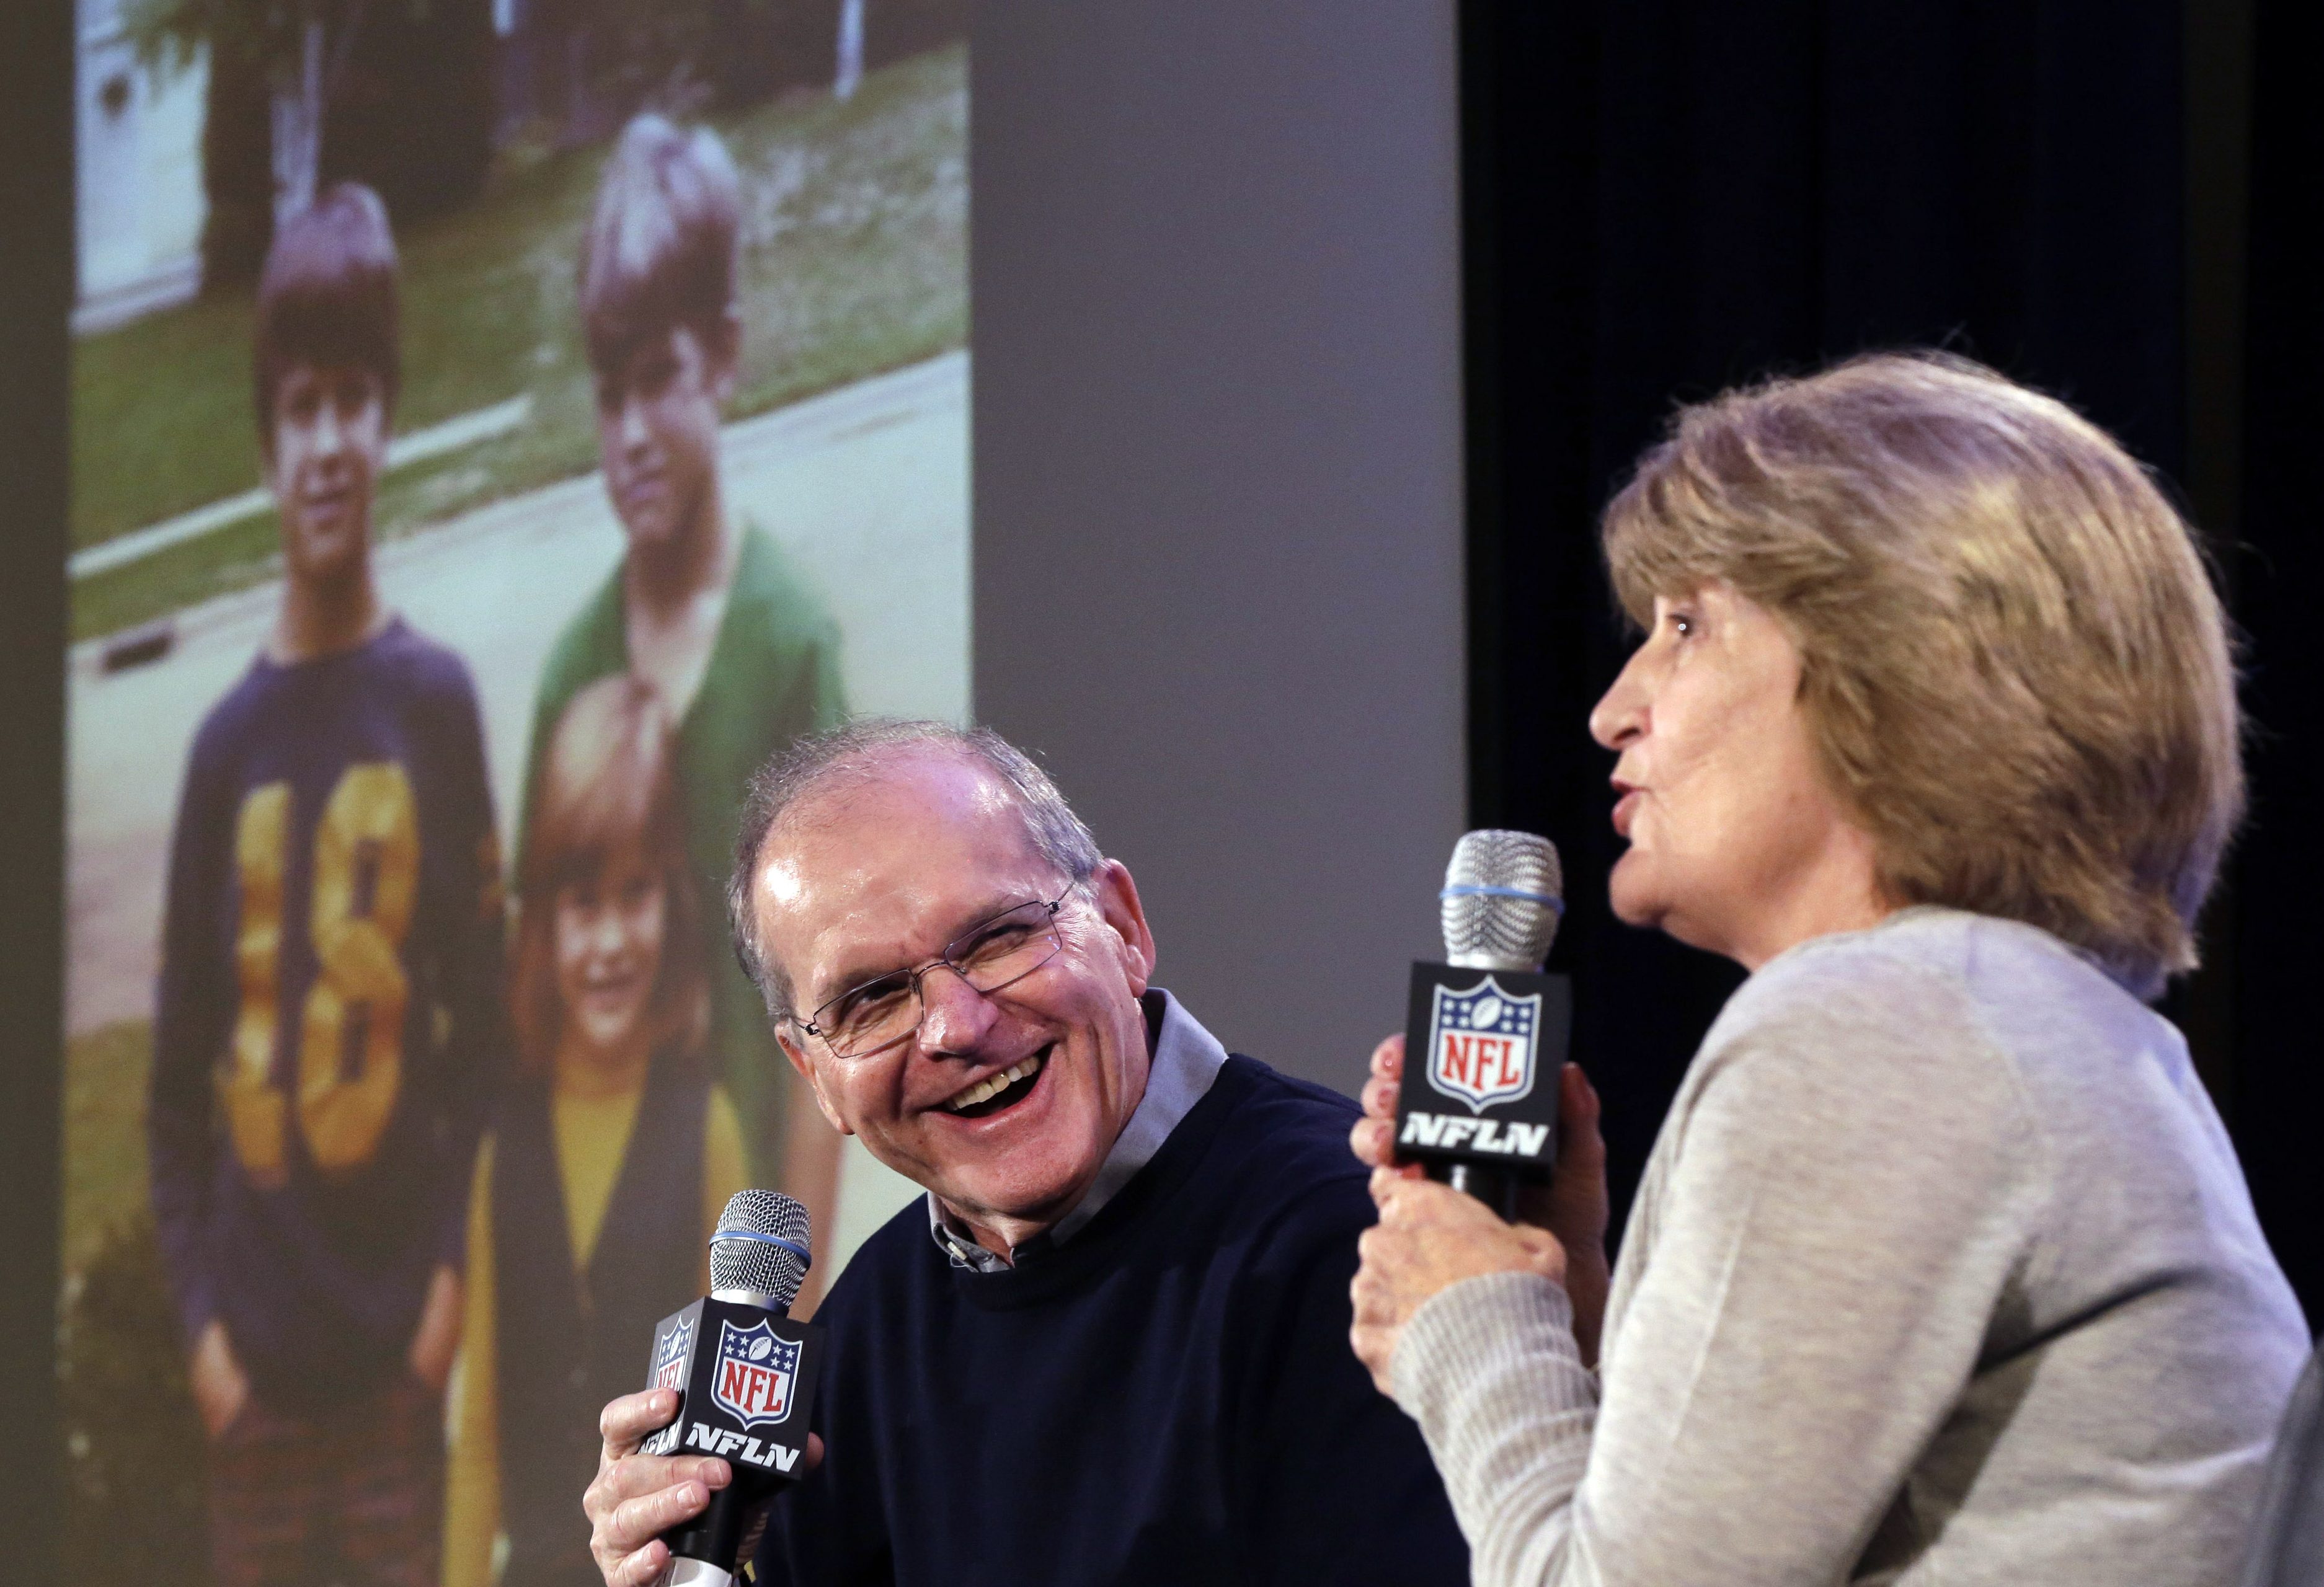 BGSU alumni Jack and Jackie Harbaugh speak into microphones while a screen projects a photo of their children, Jim, John and Joani Harbaugh.  